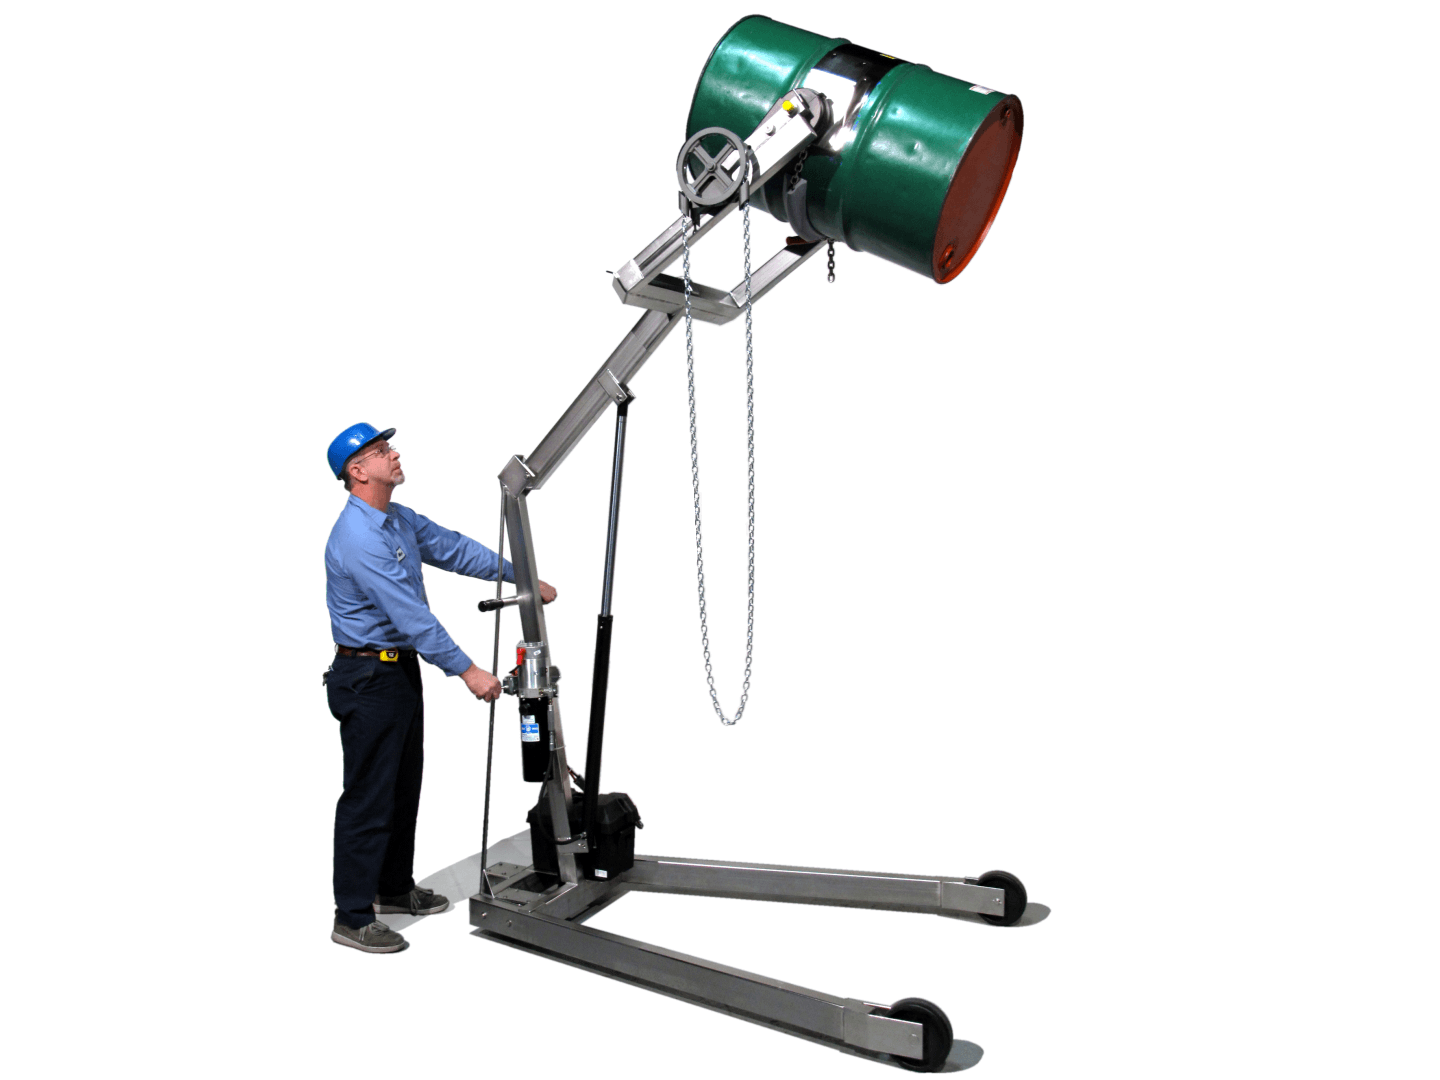 Model 400A-96SS-125 Stainless Steel Hydra-Lift Drum Carrier with Electric power drum lift, and Pull Chain manual drum tilt control.